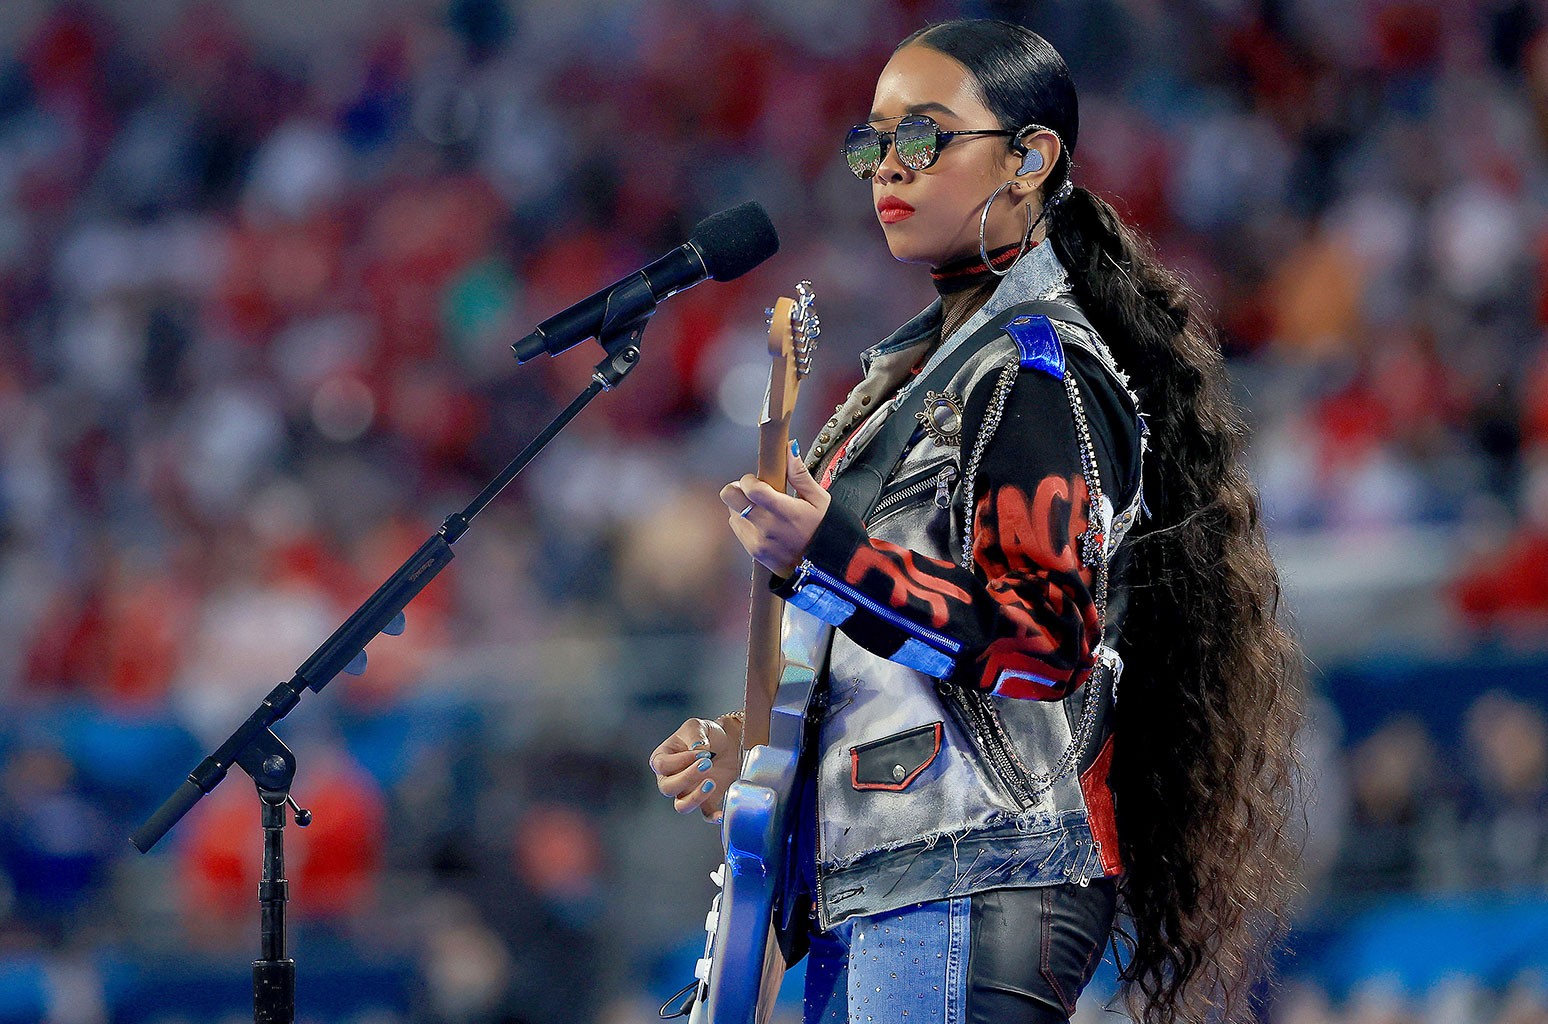 At Super Bowl LV, Grammy-Award Winning Singer H.E.R. performs the “America the Beautiful”